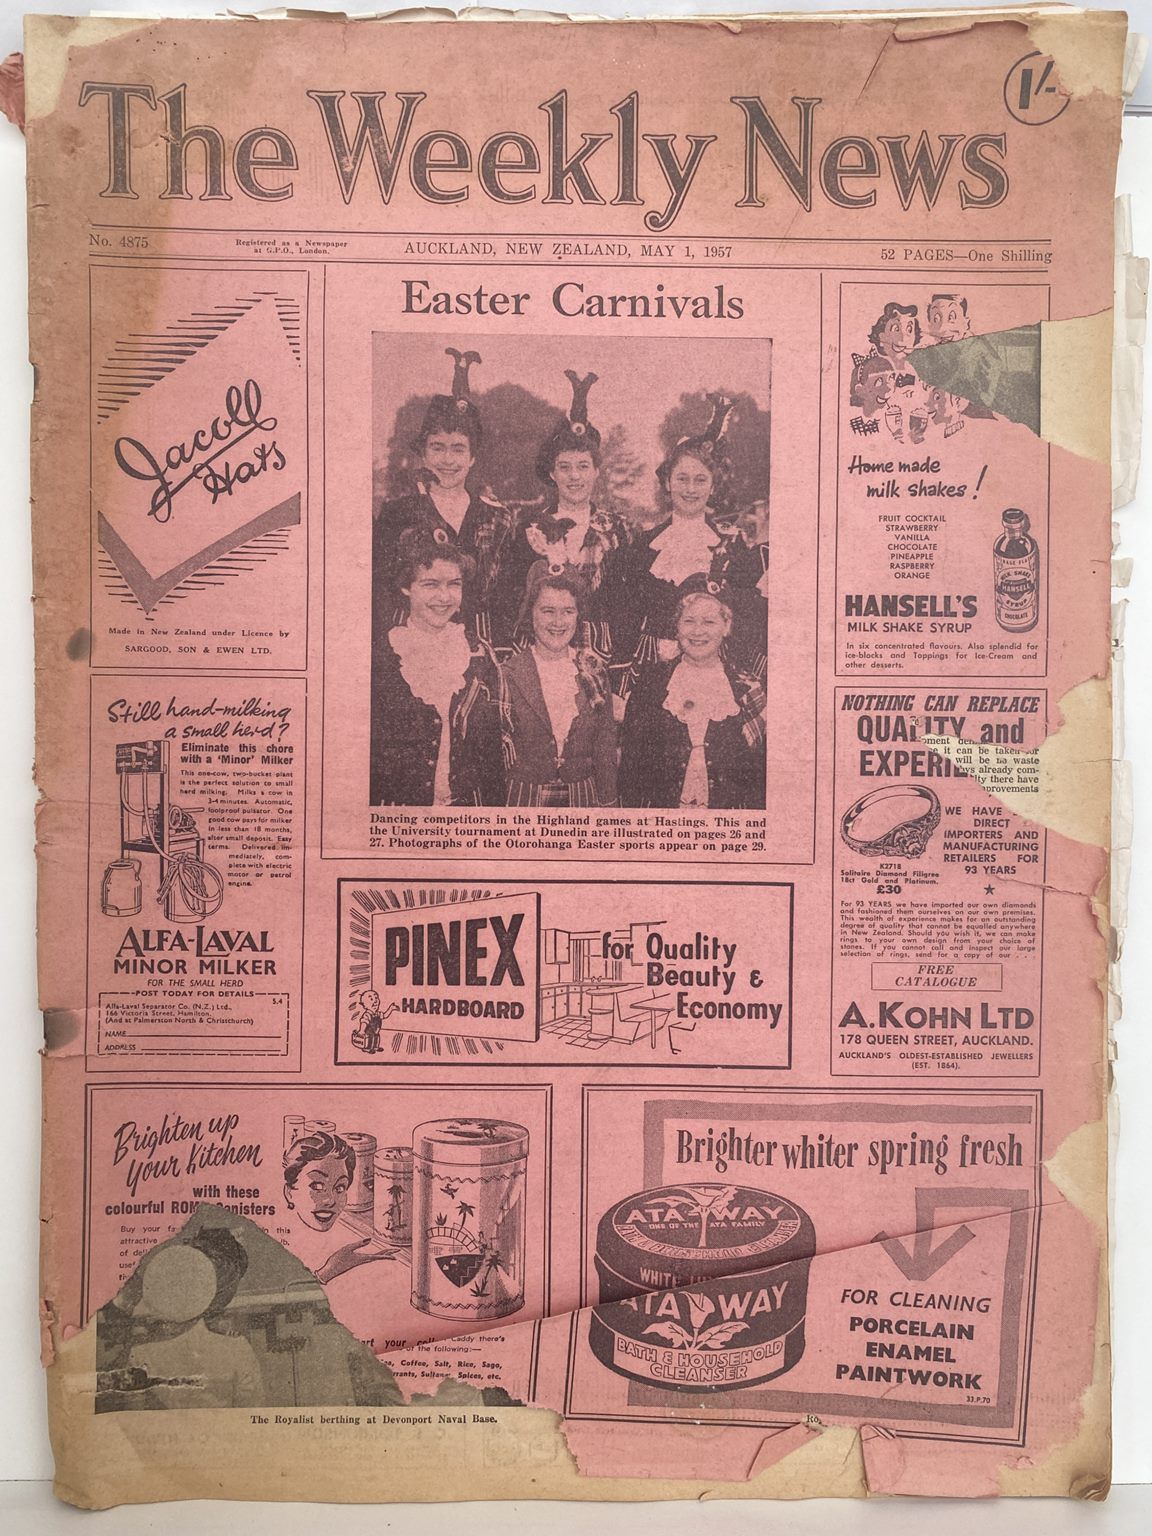 OLD NEWSPAPER: The Weekly News - 1 May 1957